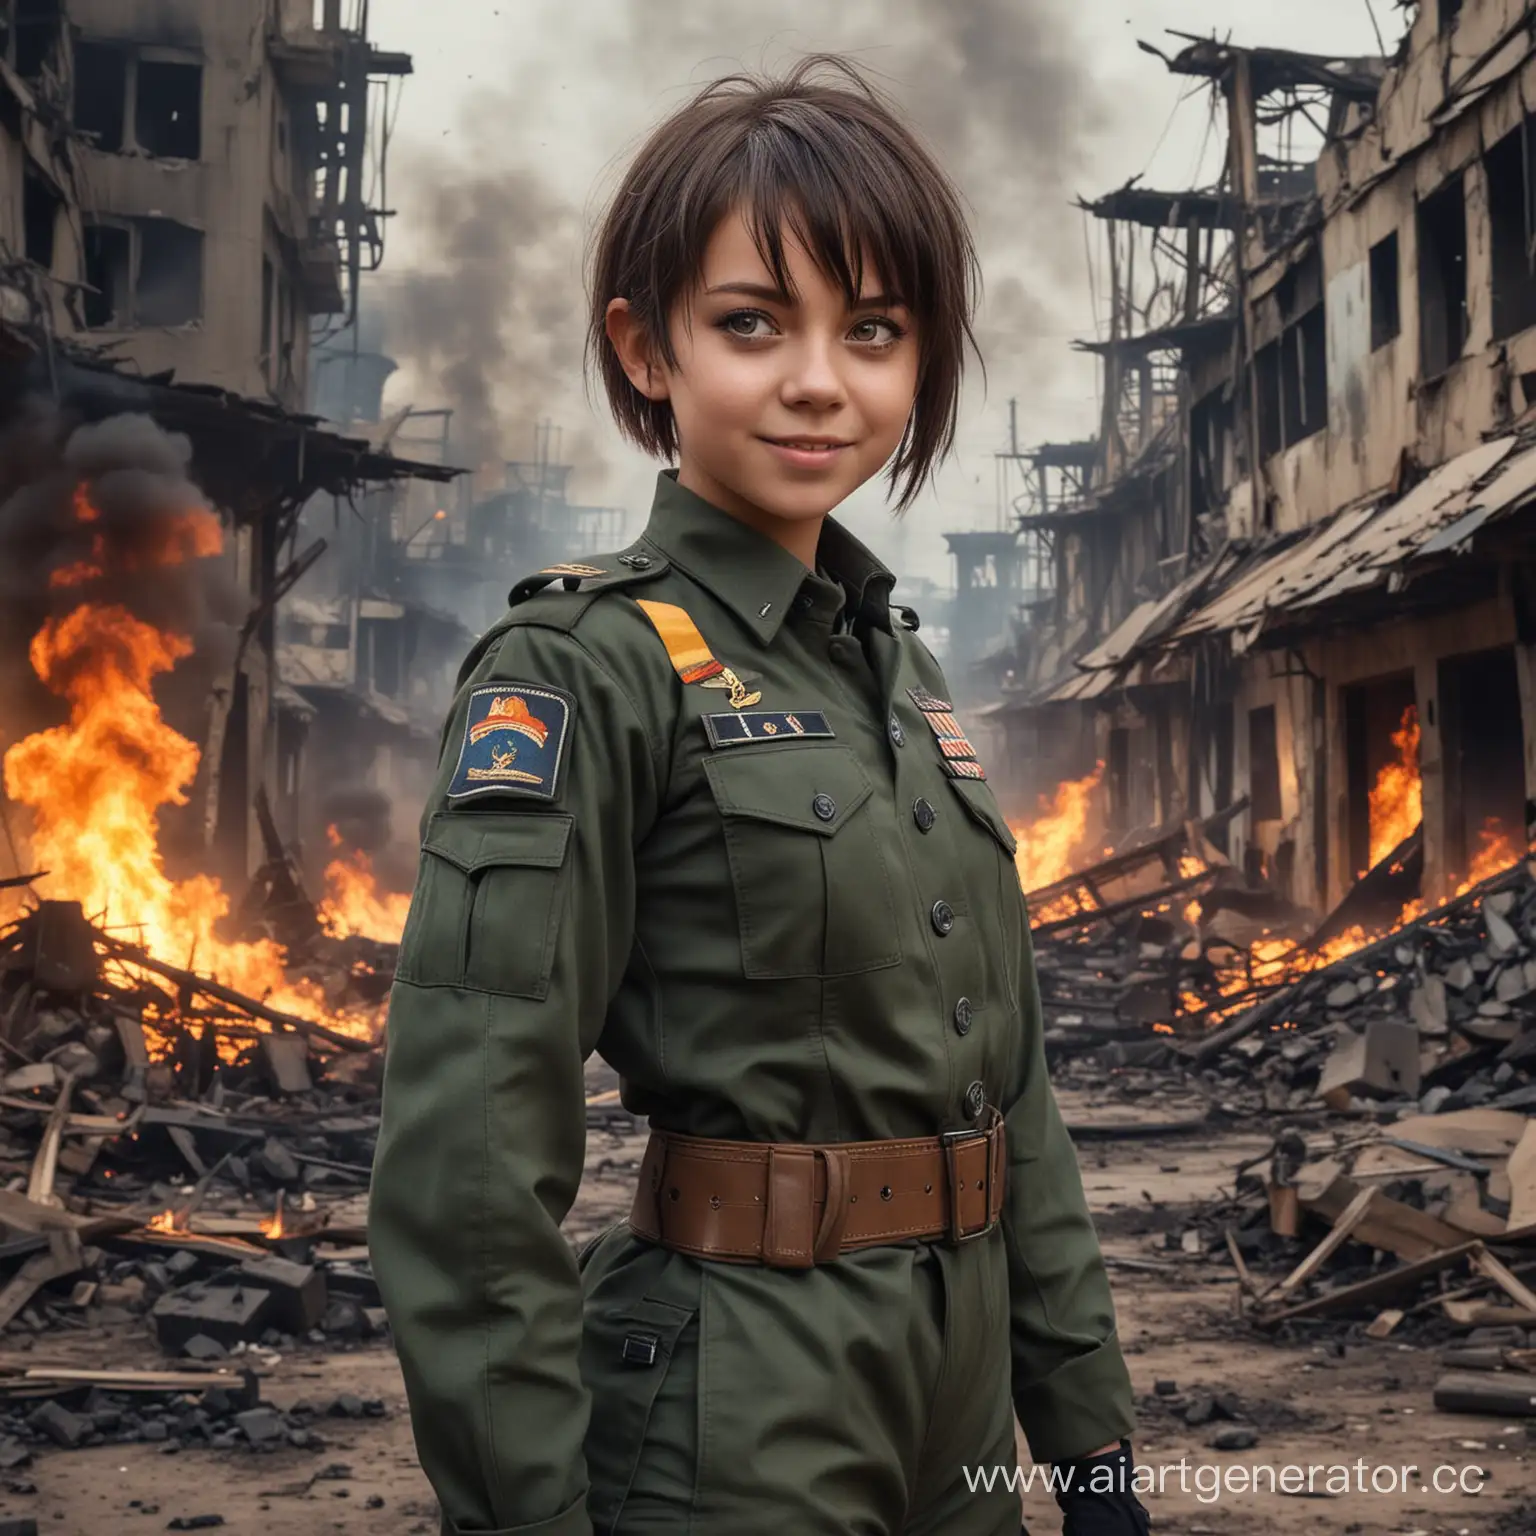 Futuristic-Loli-Soldier-Amidst-Chaos-and-Flames